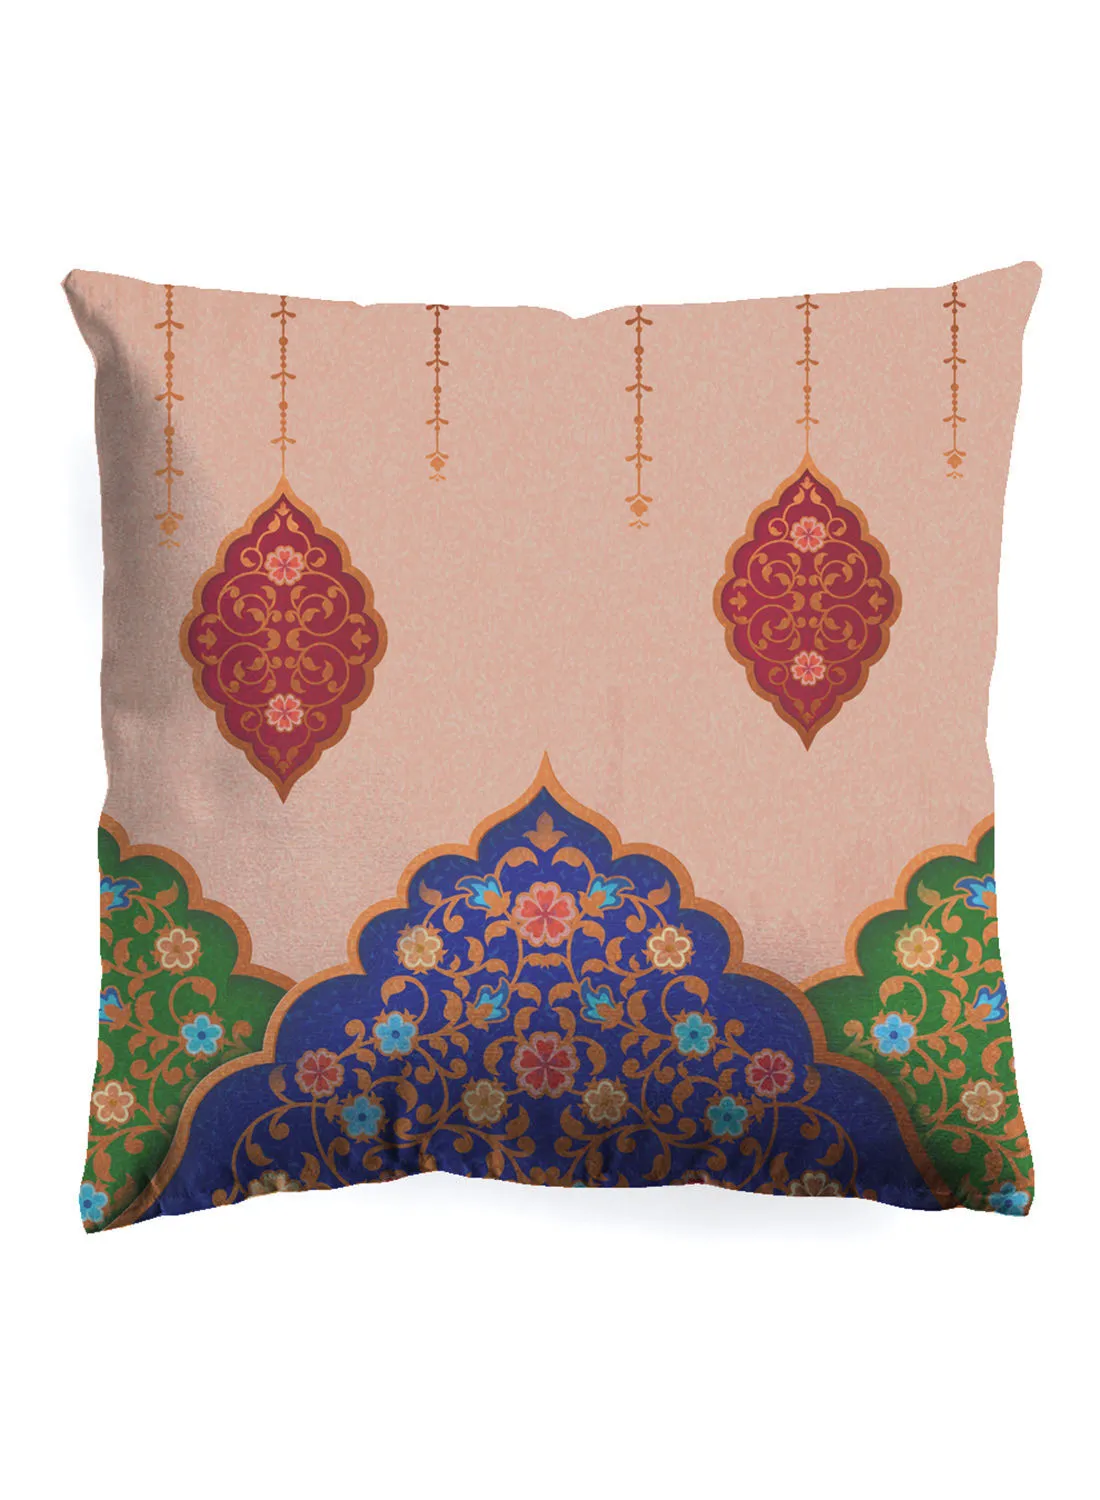 noon east Decorative Cushion , Size 45X45 Cm Kanyla - 100% Cotton Cover Microfiber Infill Bedroom Or Living Room Decoration